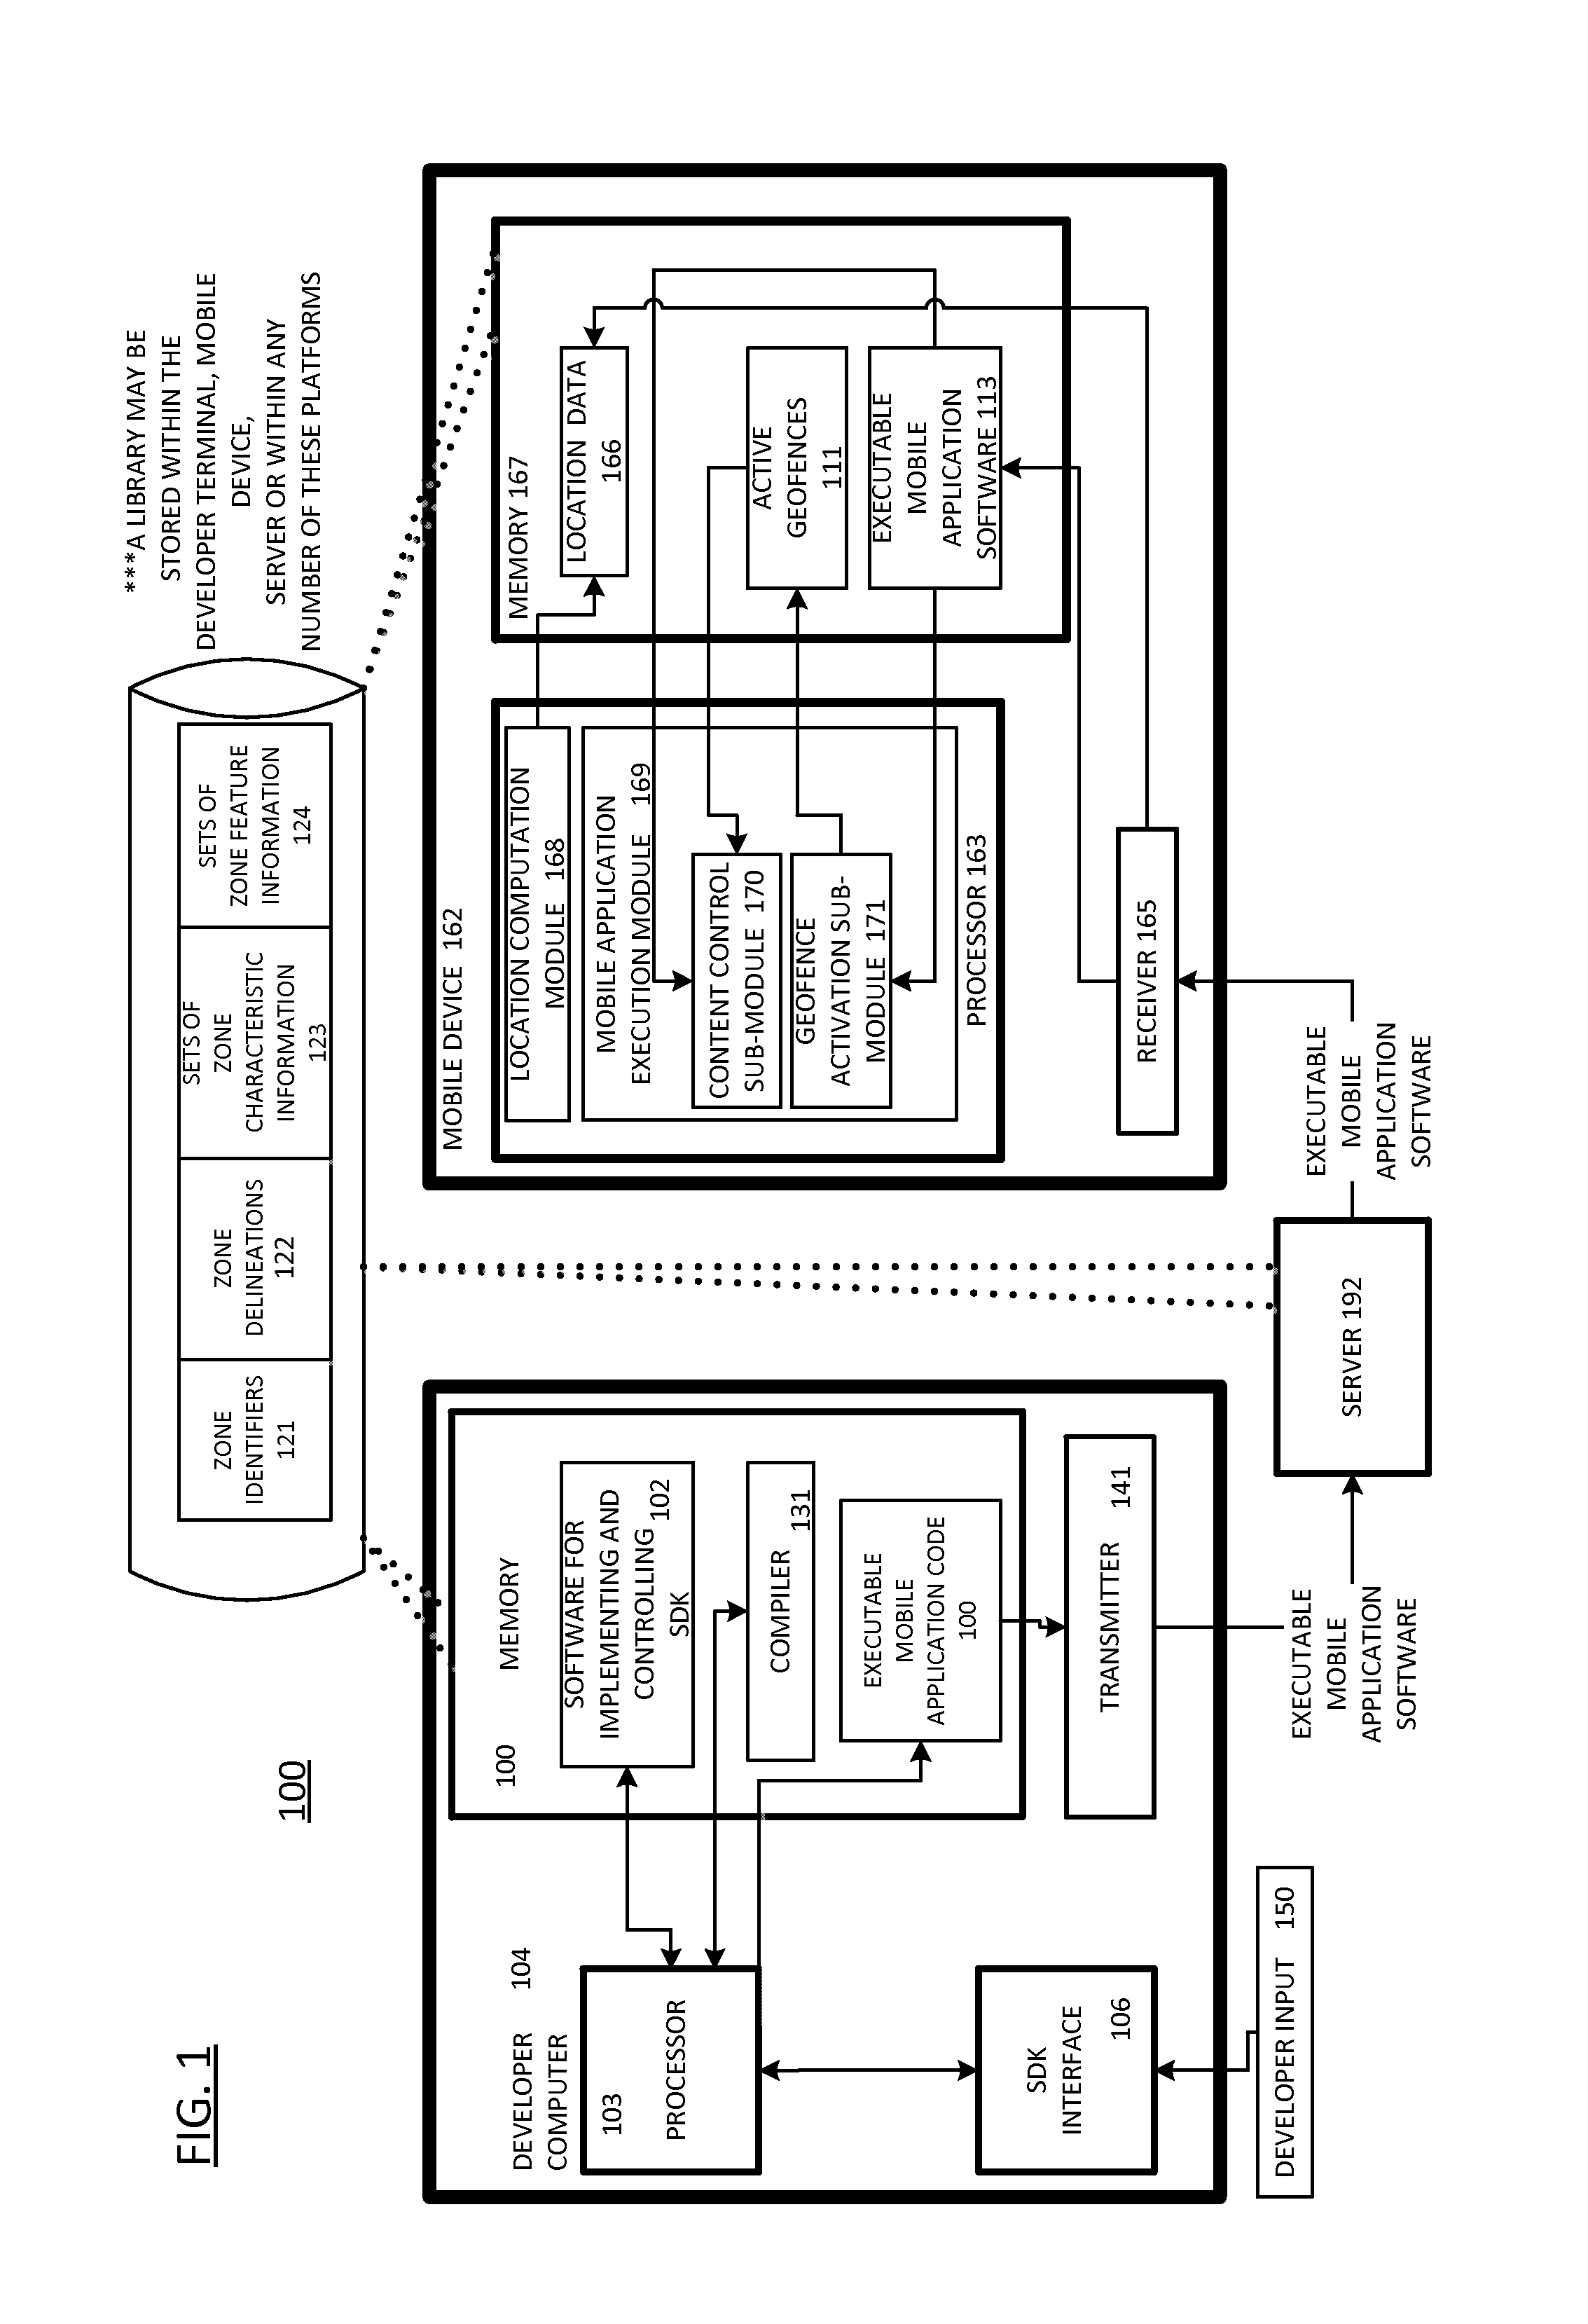 Method and apparatus for provisioning geofences